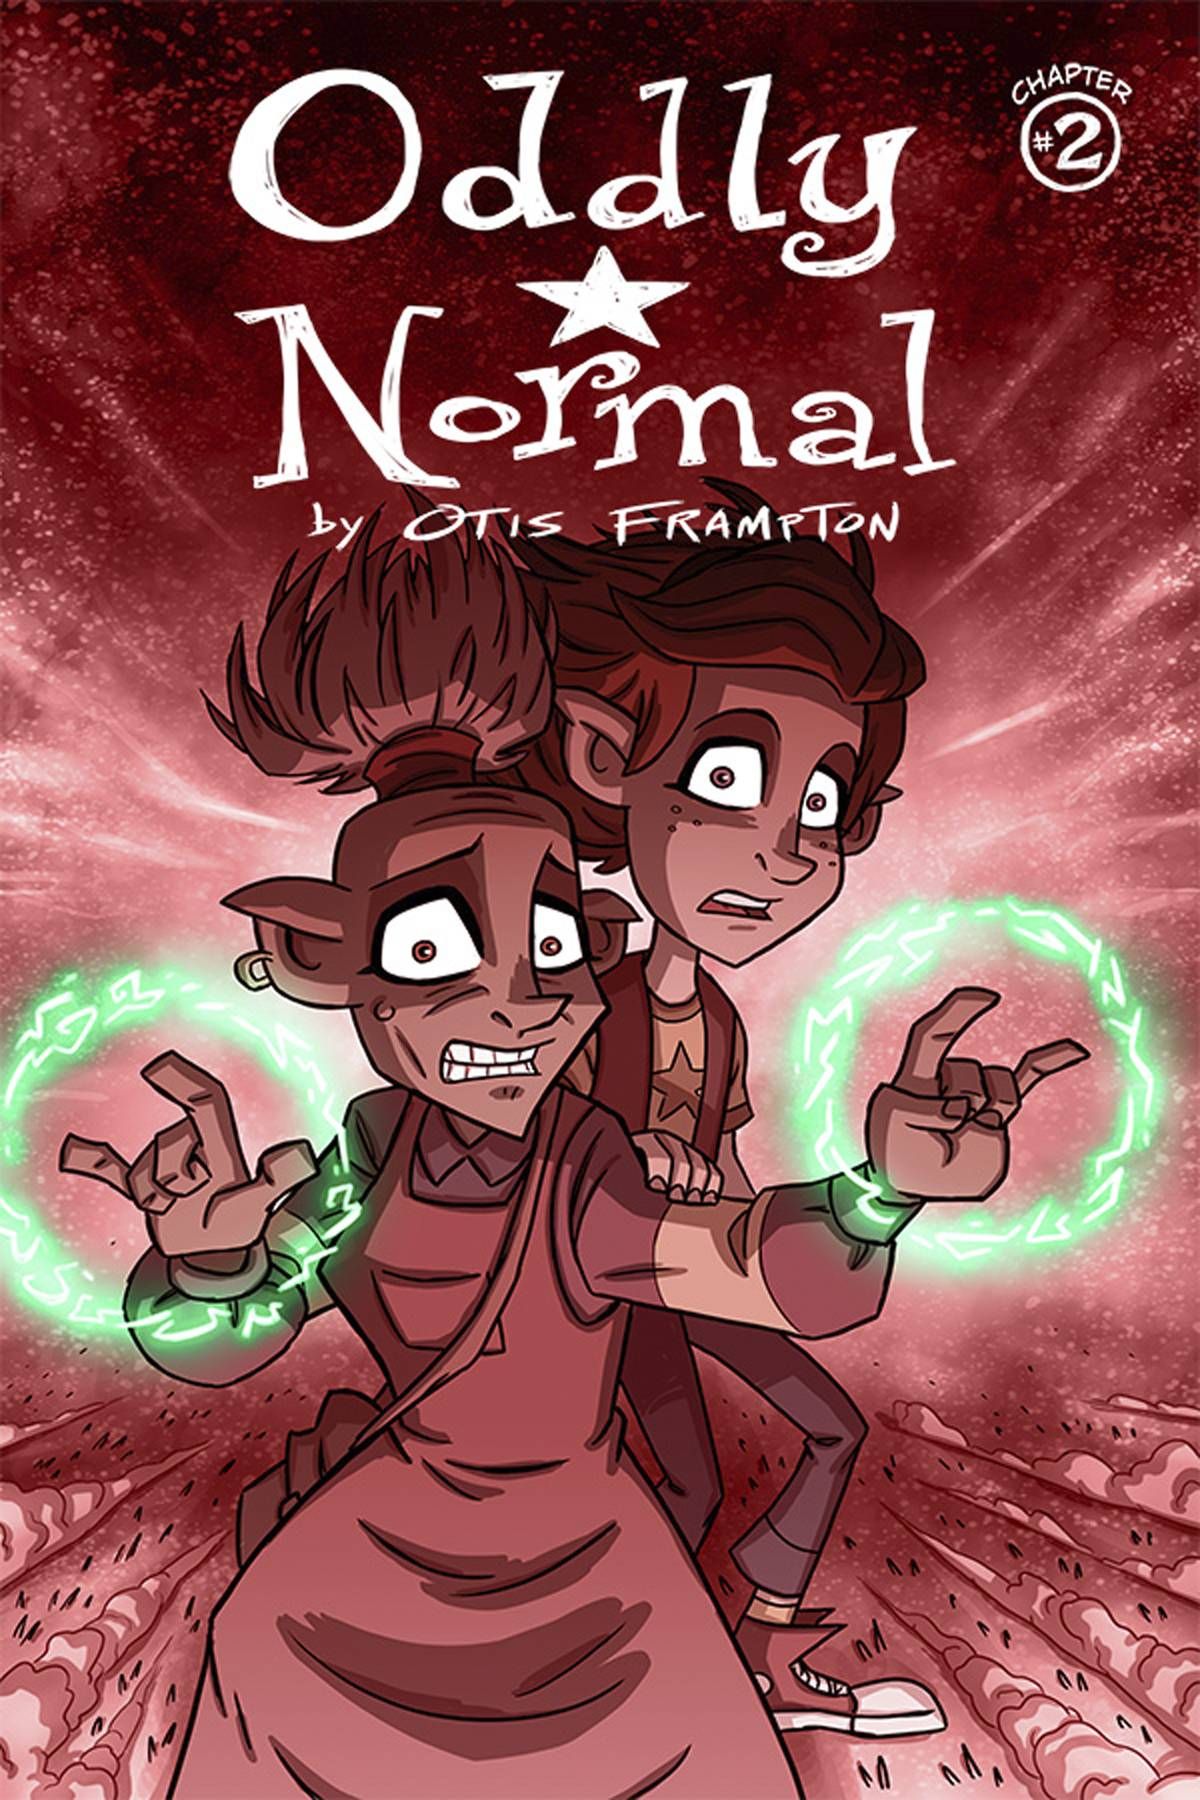 Oddly Normal #2 Comic